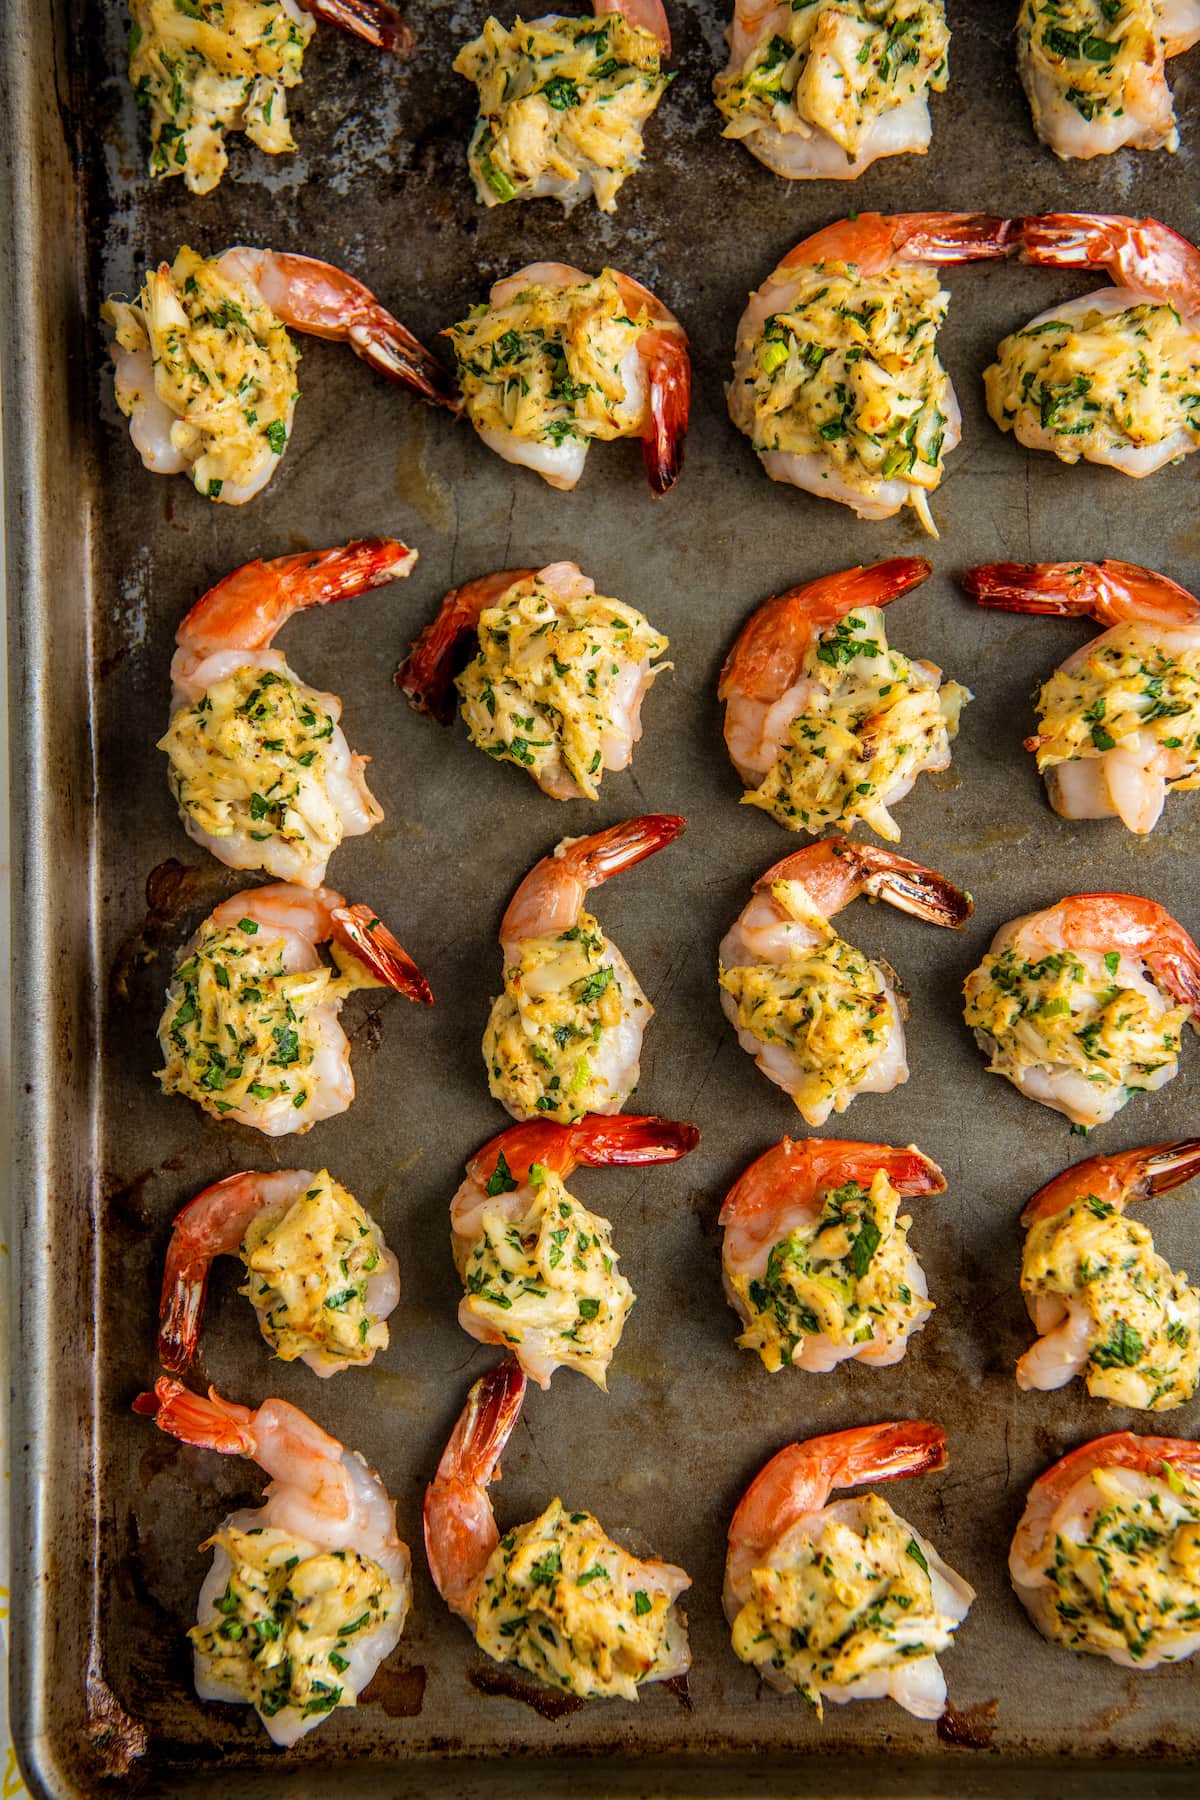 A baking sheet of shrimp with crab stuffing.